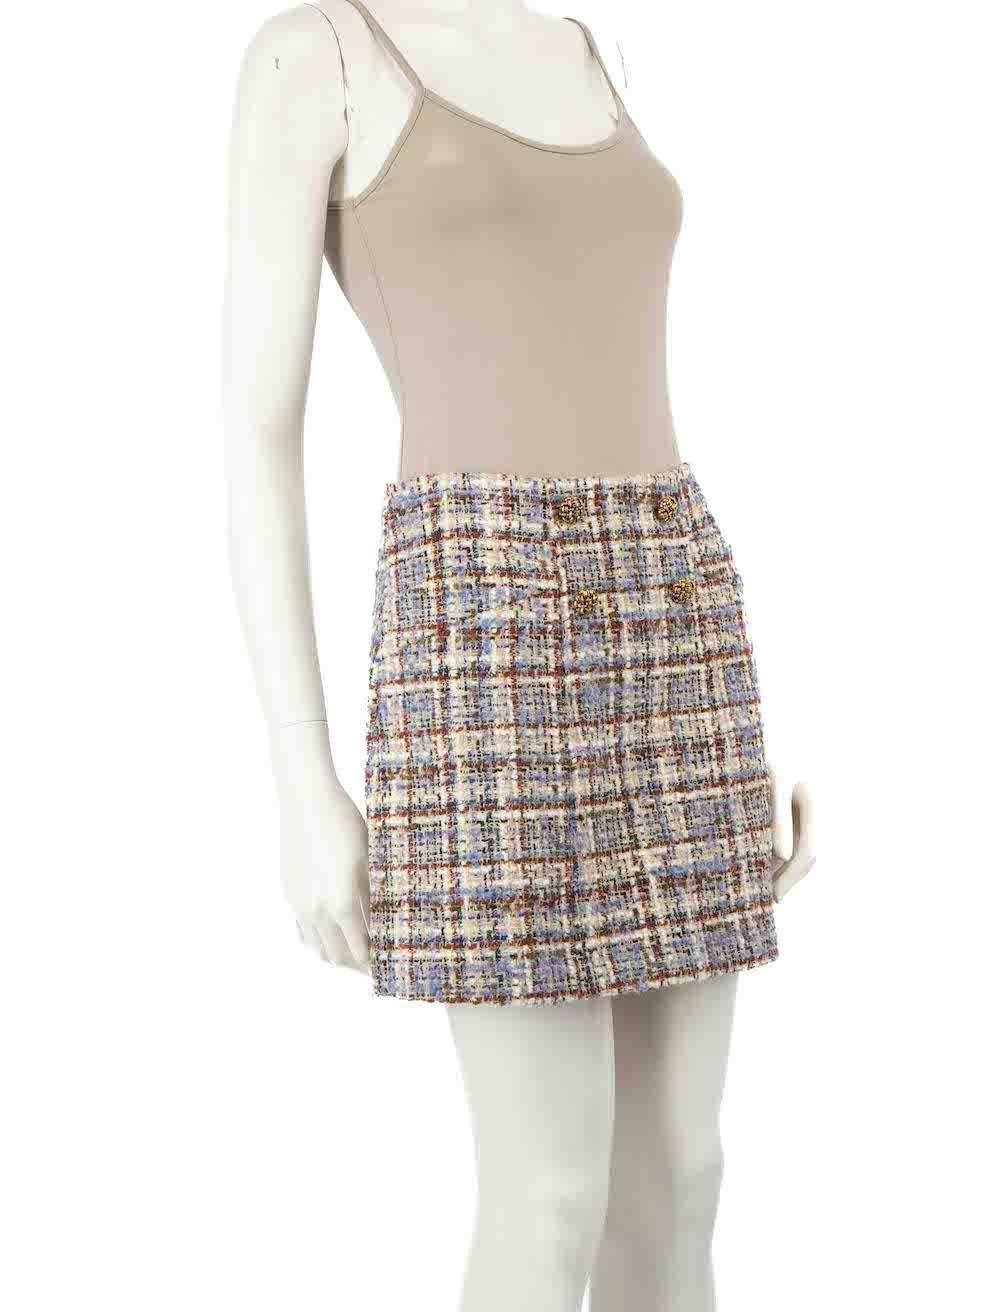 CONDITION is Very good. Hardly any visible wear to skirt is evident on this used BA&SH designer resale item.
 
 
 
 Details
 
 
 Multicolour- blue tone
 
 Polyester
 
 Skirt
 
 A-line
 
 Mini
 
 Tartan pattern
 
 Front gold button detail
 
 Back zip